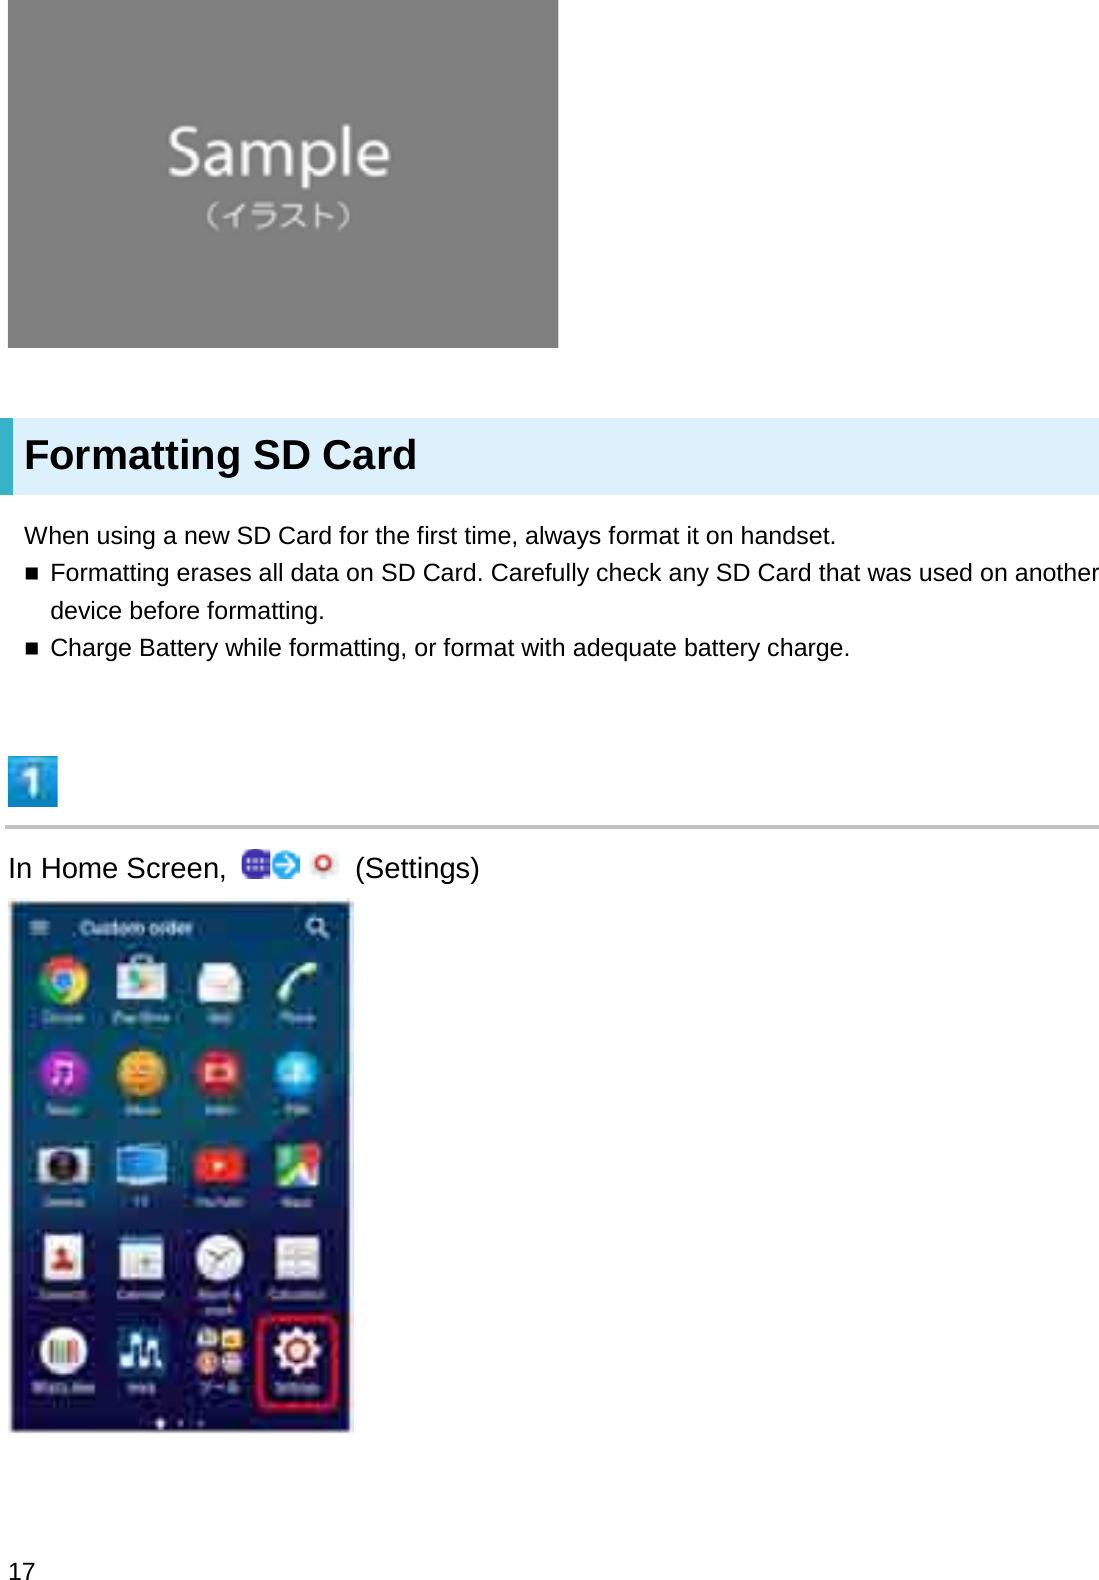 Formatting SD CardWhen using a new SD Card for the first time, always format it on handset.Formatting erases all data on SD Card. Carefully check any SD Card that was used on another device before formatting.Charge Battery while formatting, or format with adequate battery charge.In Home Screen,  (Settings)17